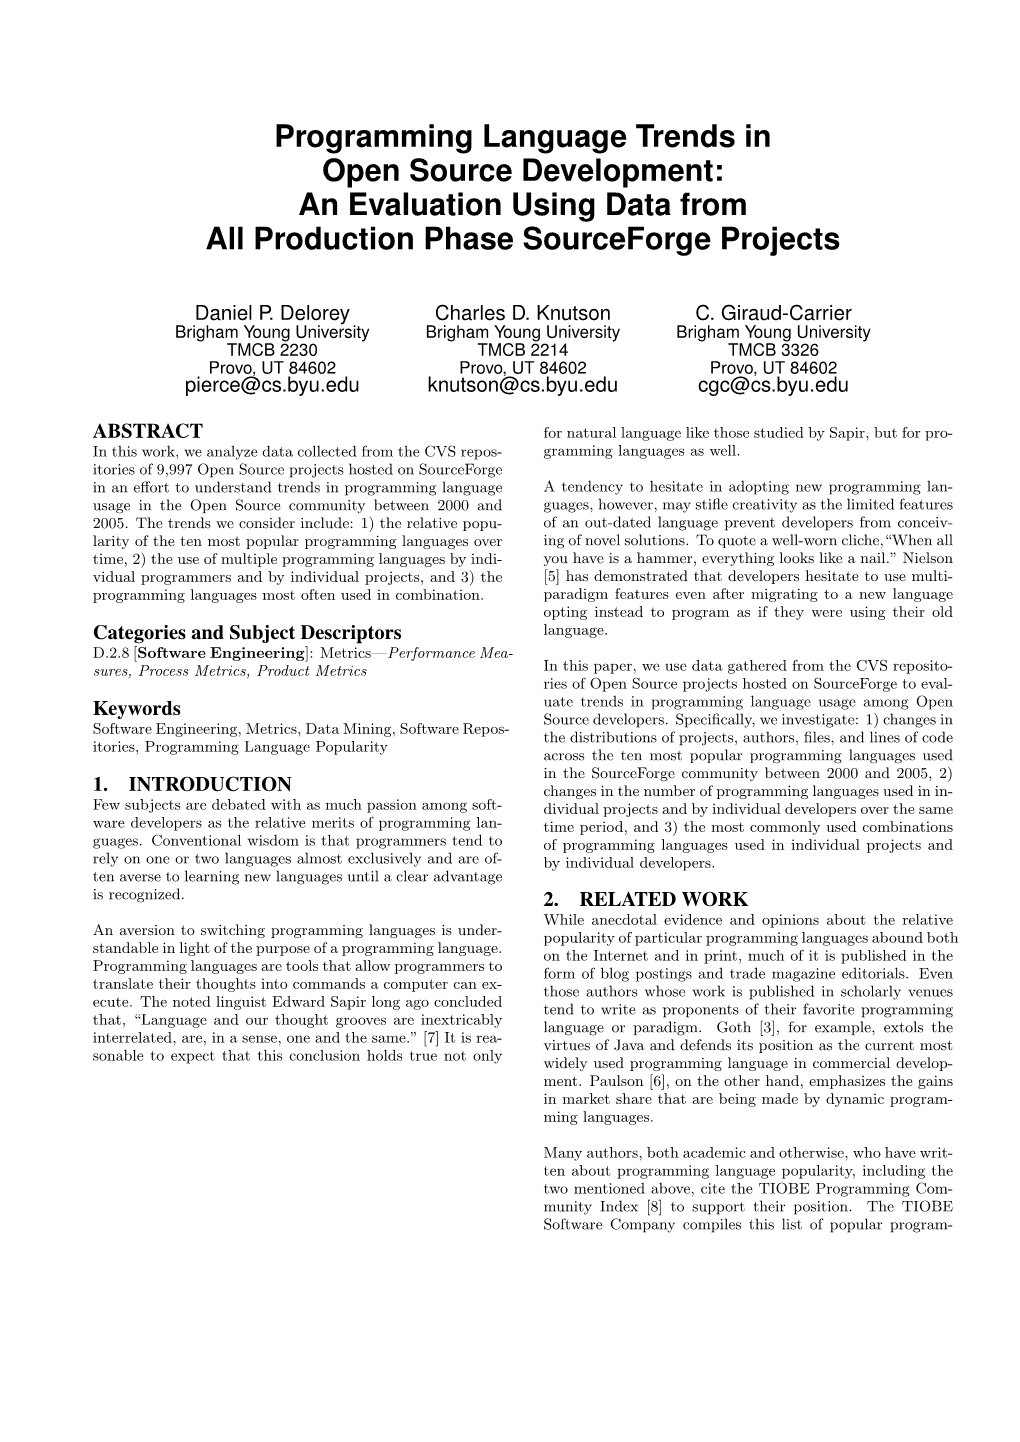 Programming Language Trends in Open Source Development: an Evaluation Using Data from All Production Phase Sourceforge Projects